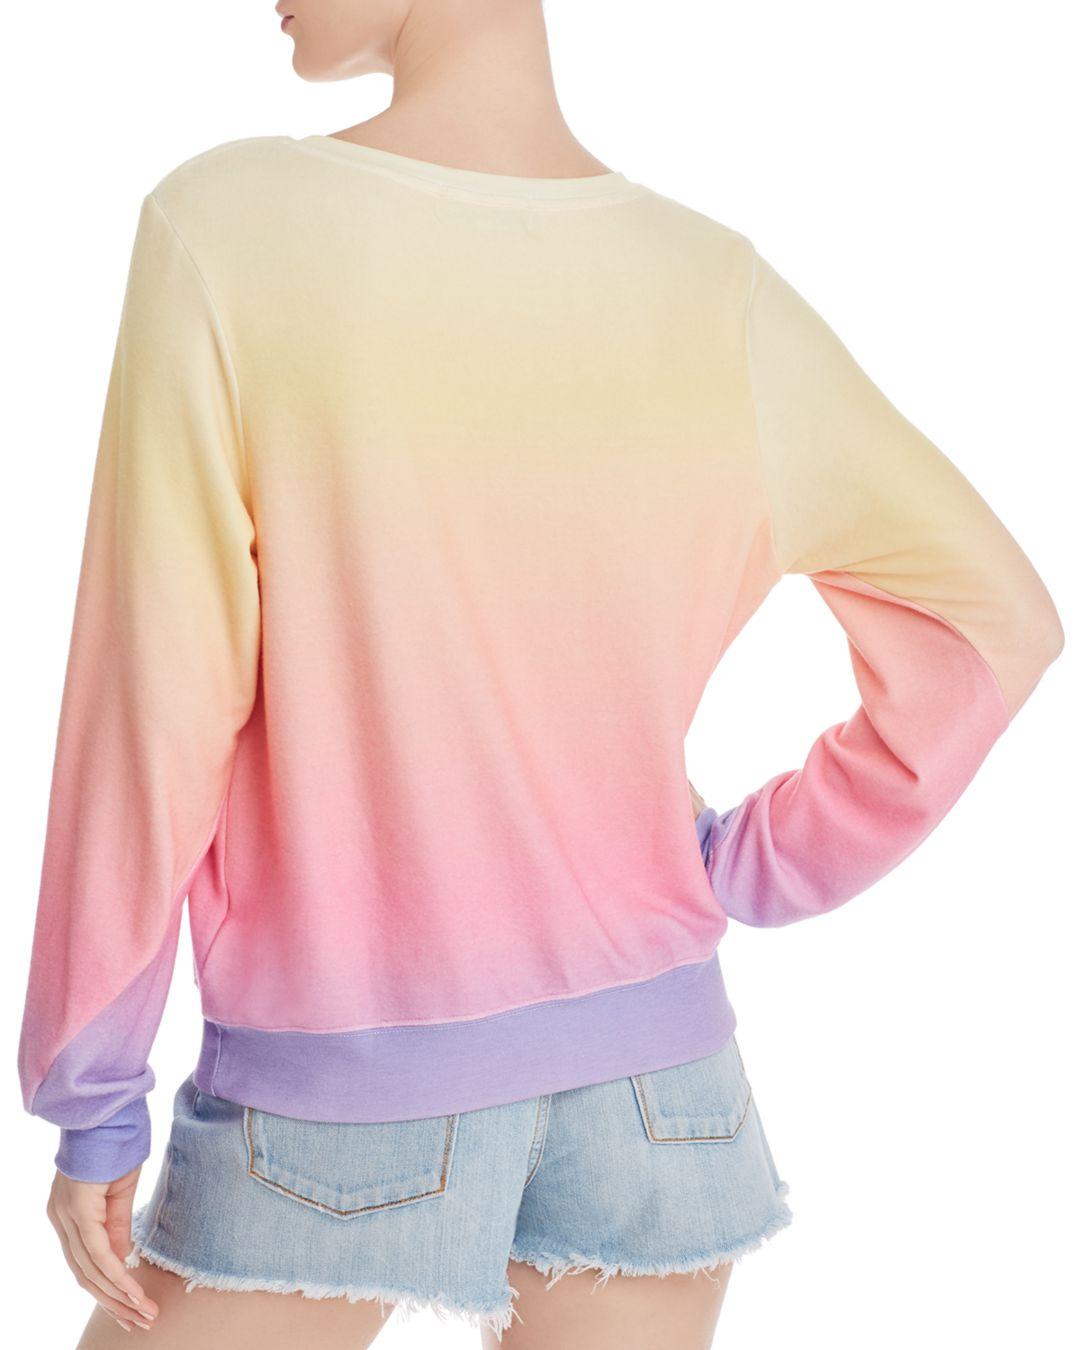 Wildfox Synthetic Baggy Beach Ombré Sweatshirt in Pink - Lyst